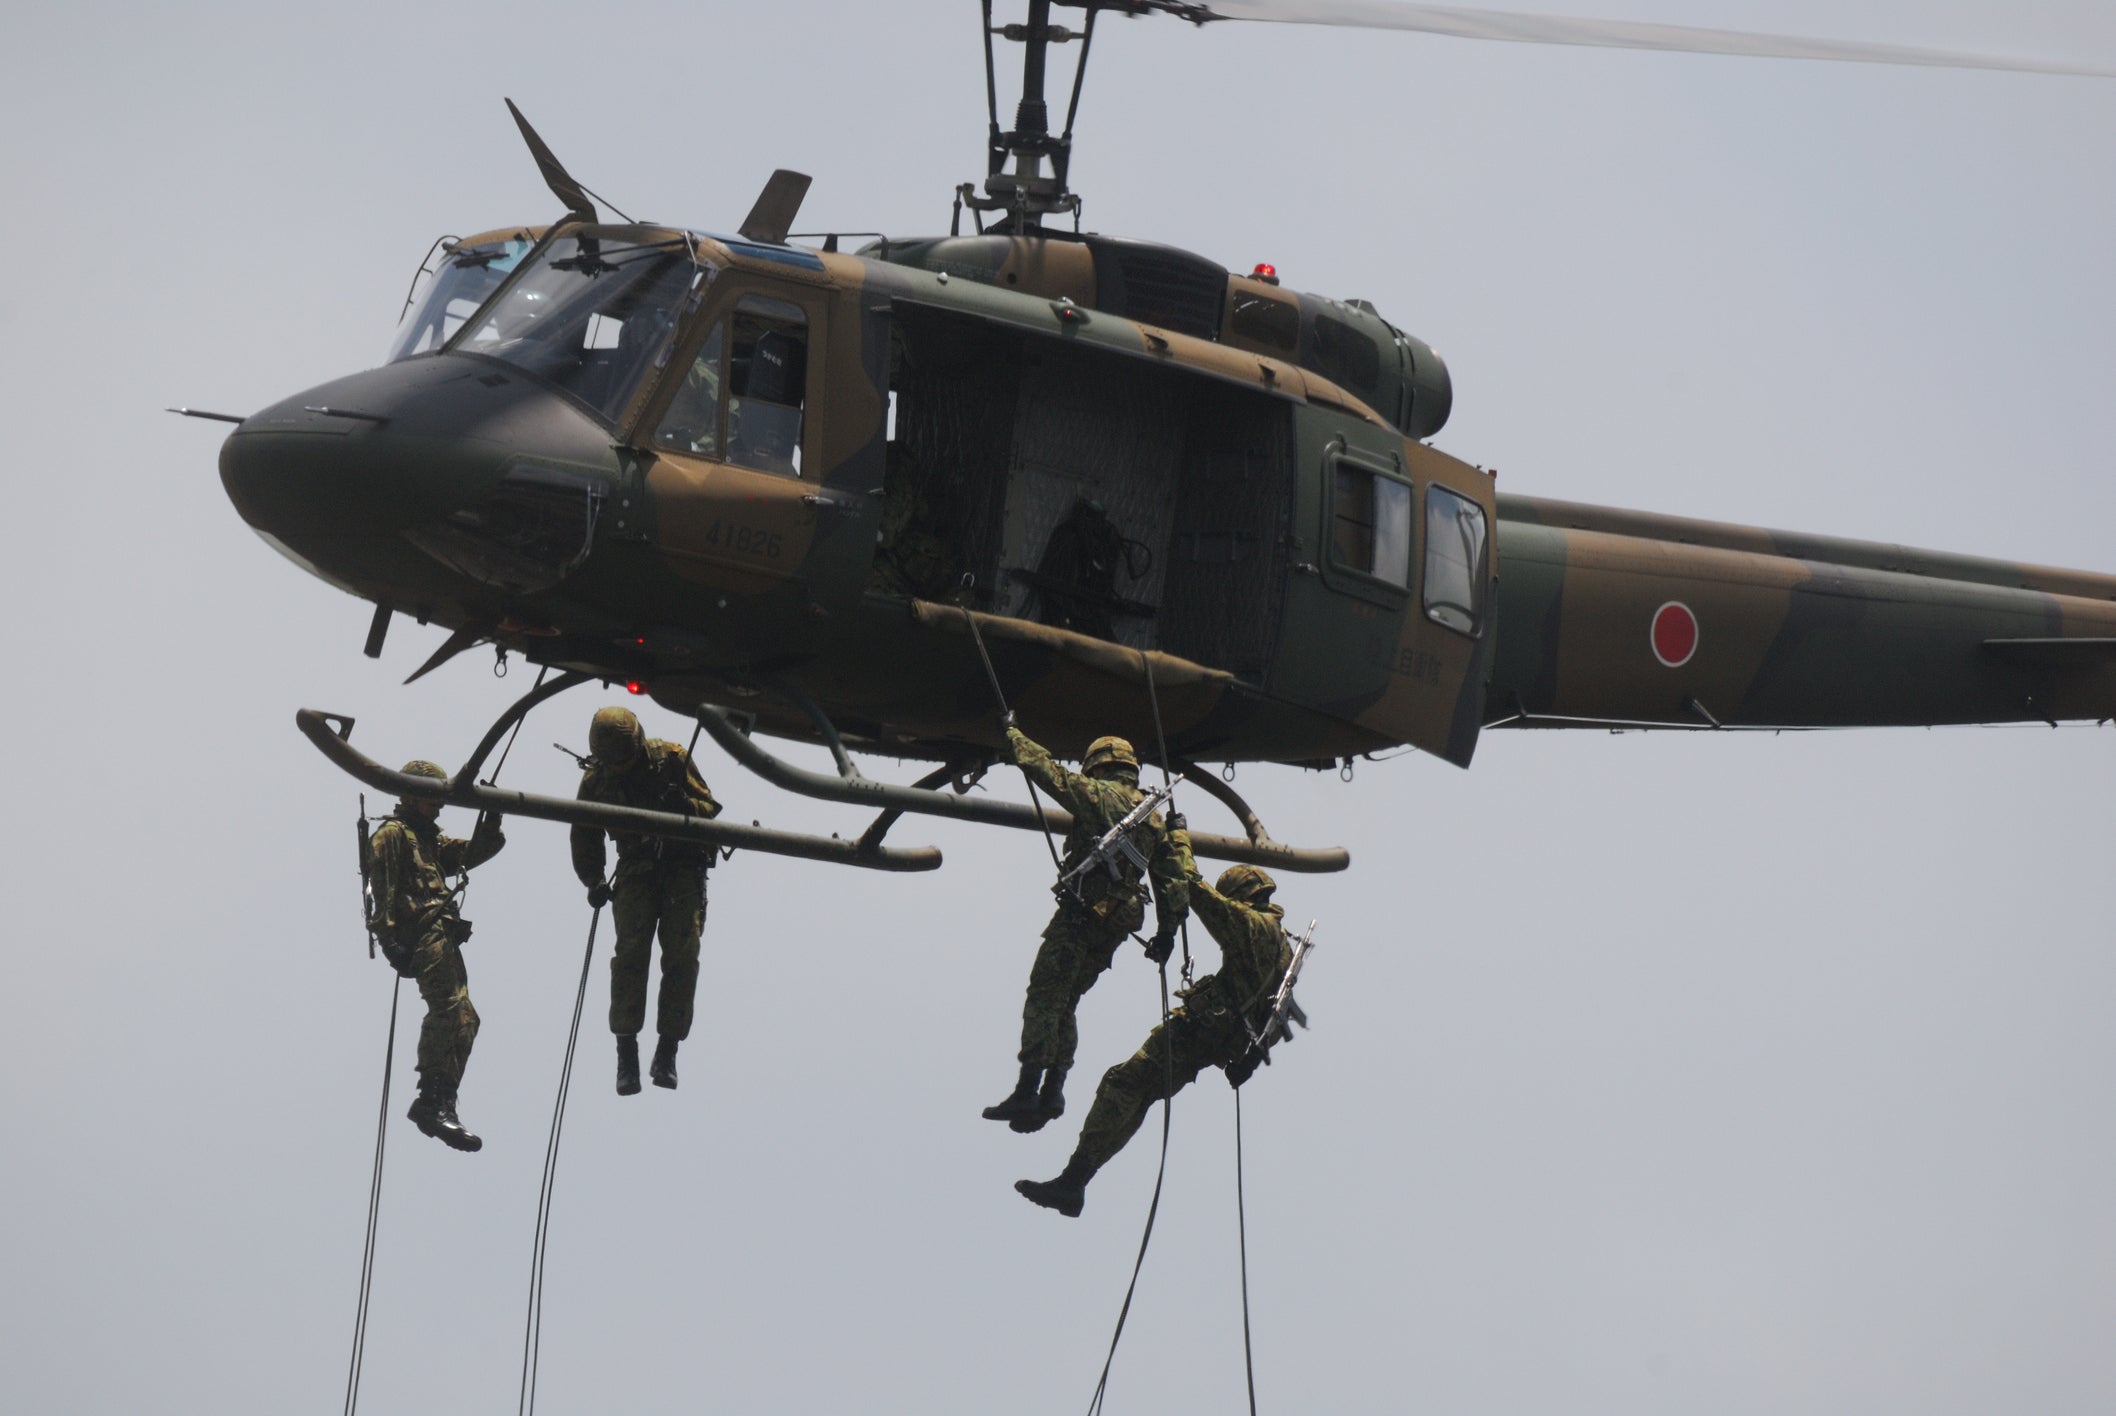 The role of the Self-Defense Forces: Disaster prevention and security in Japan